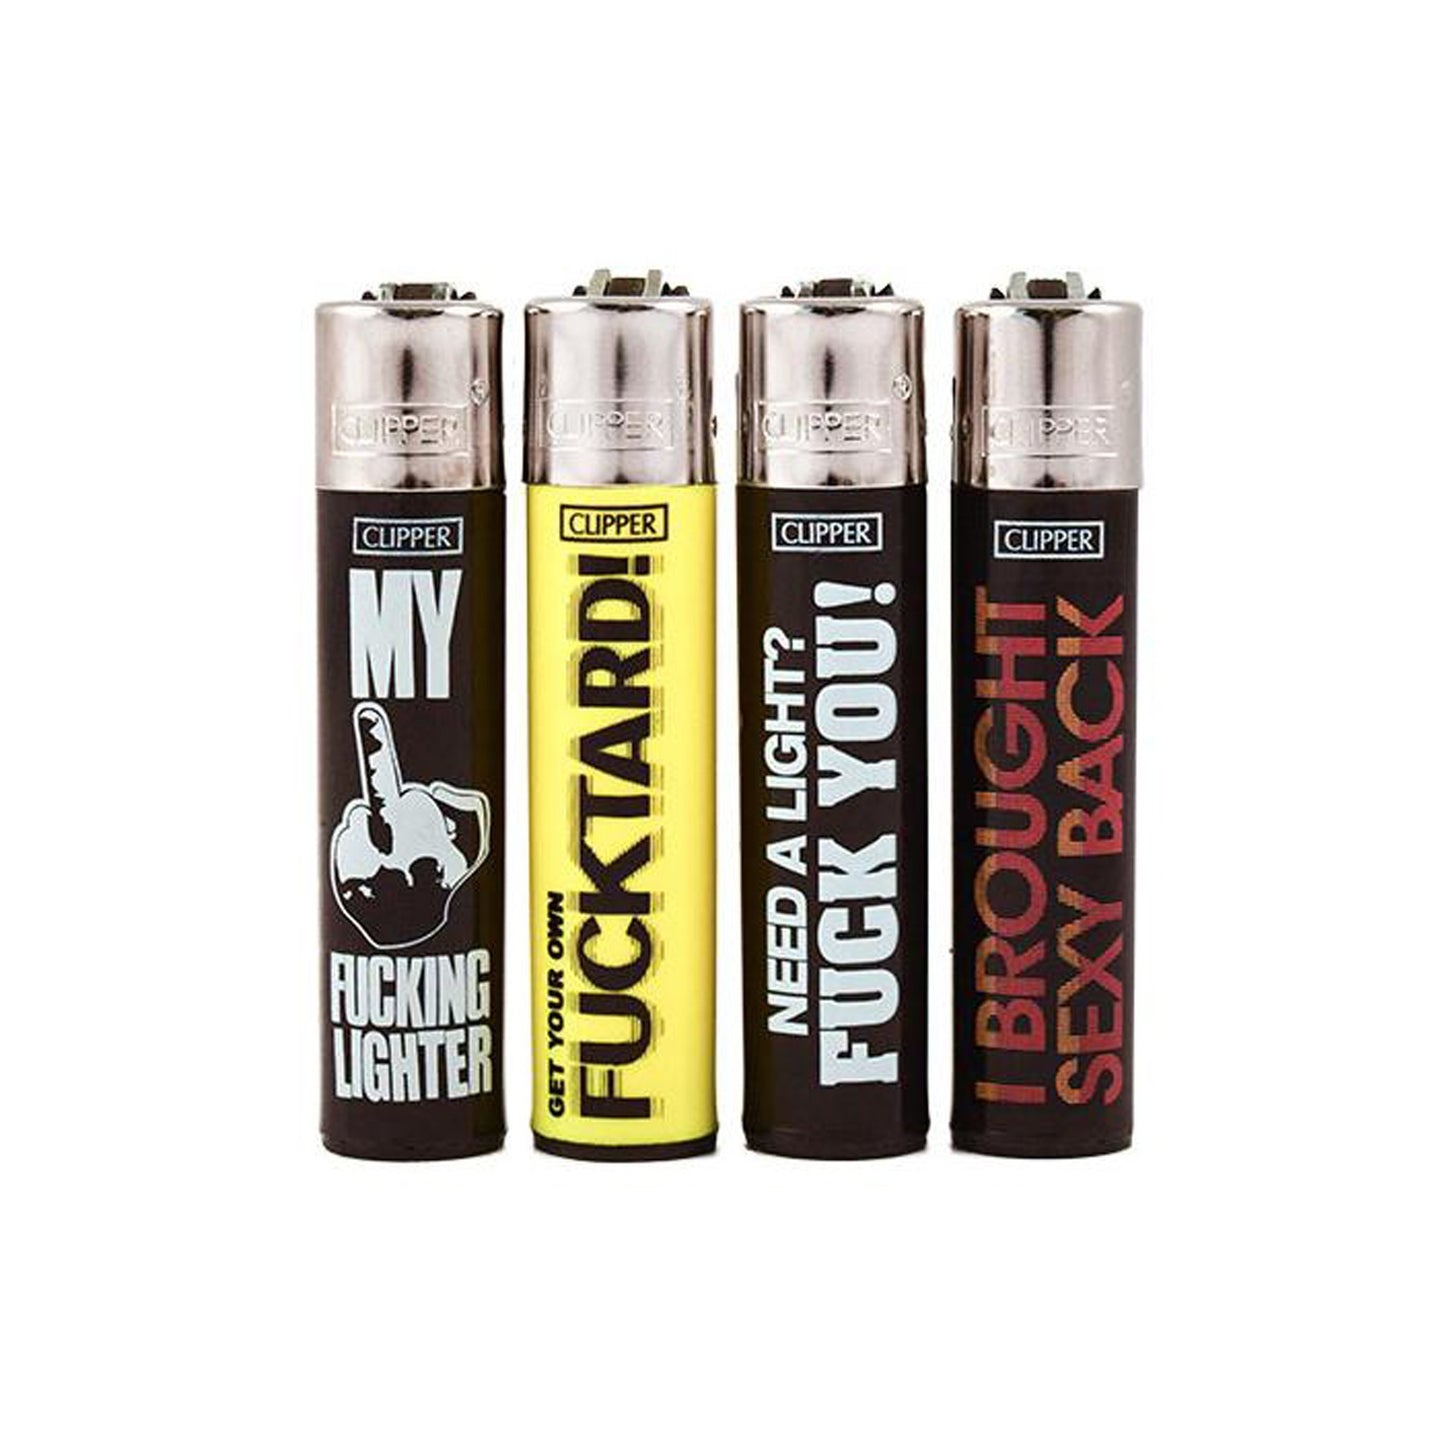 Clipper Lighter - 3 Pack Funny Sayings